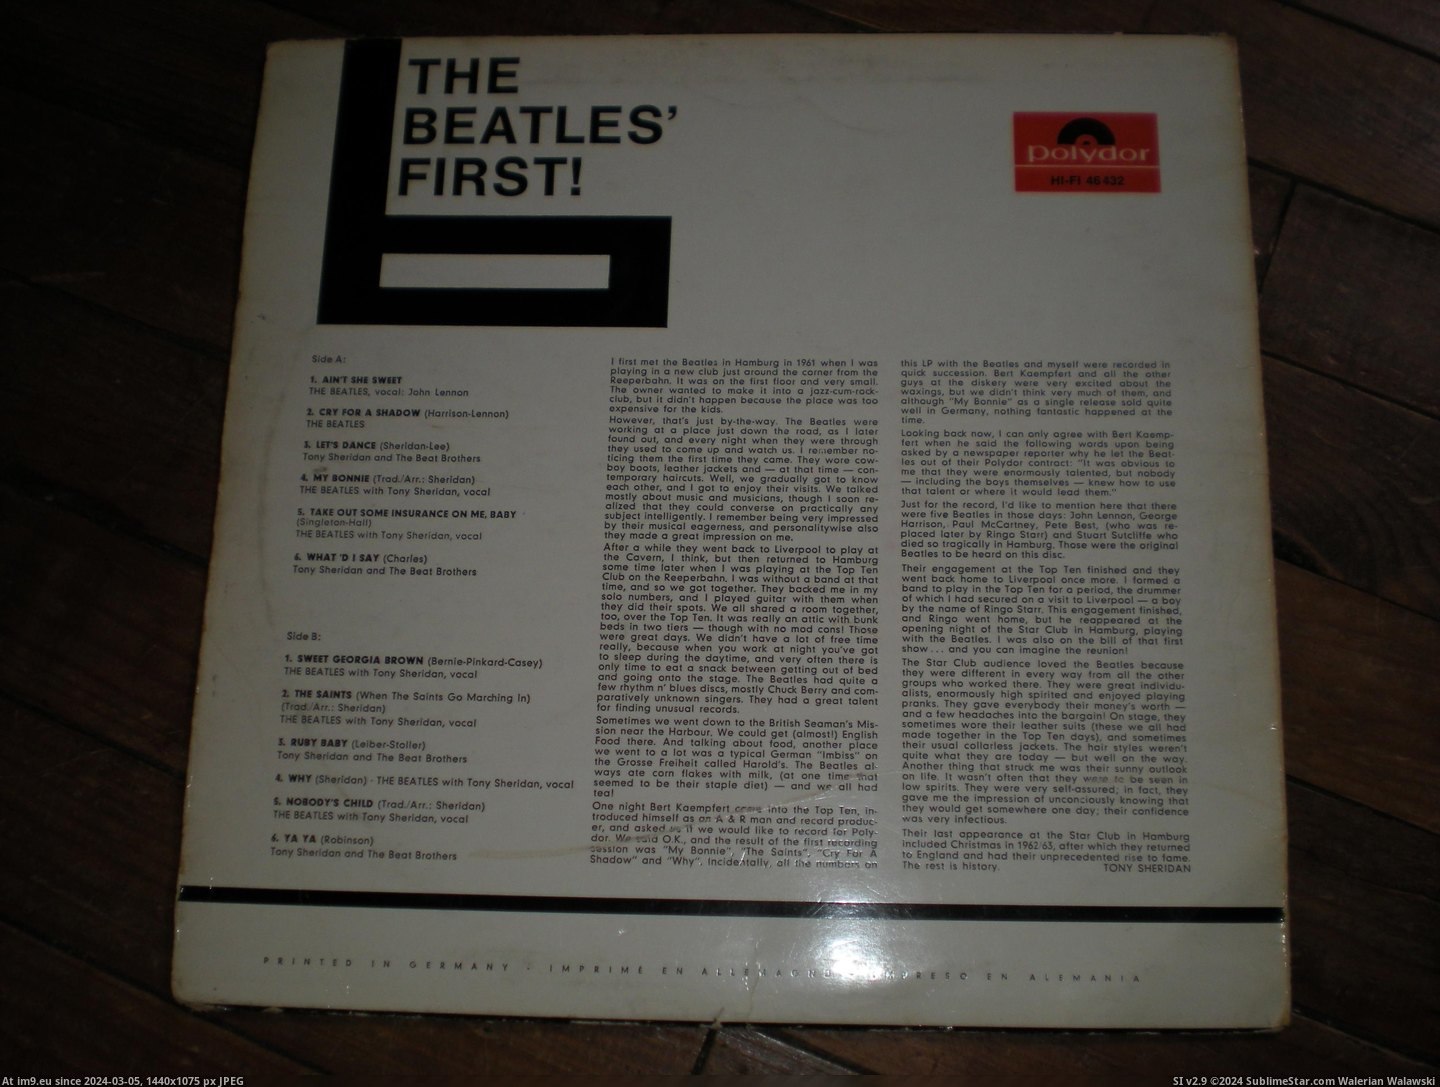  #Beatles  Beatles First 6 Pic. (Image of album new 1))